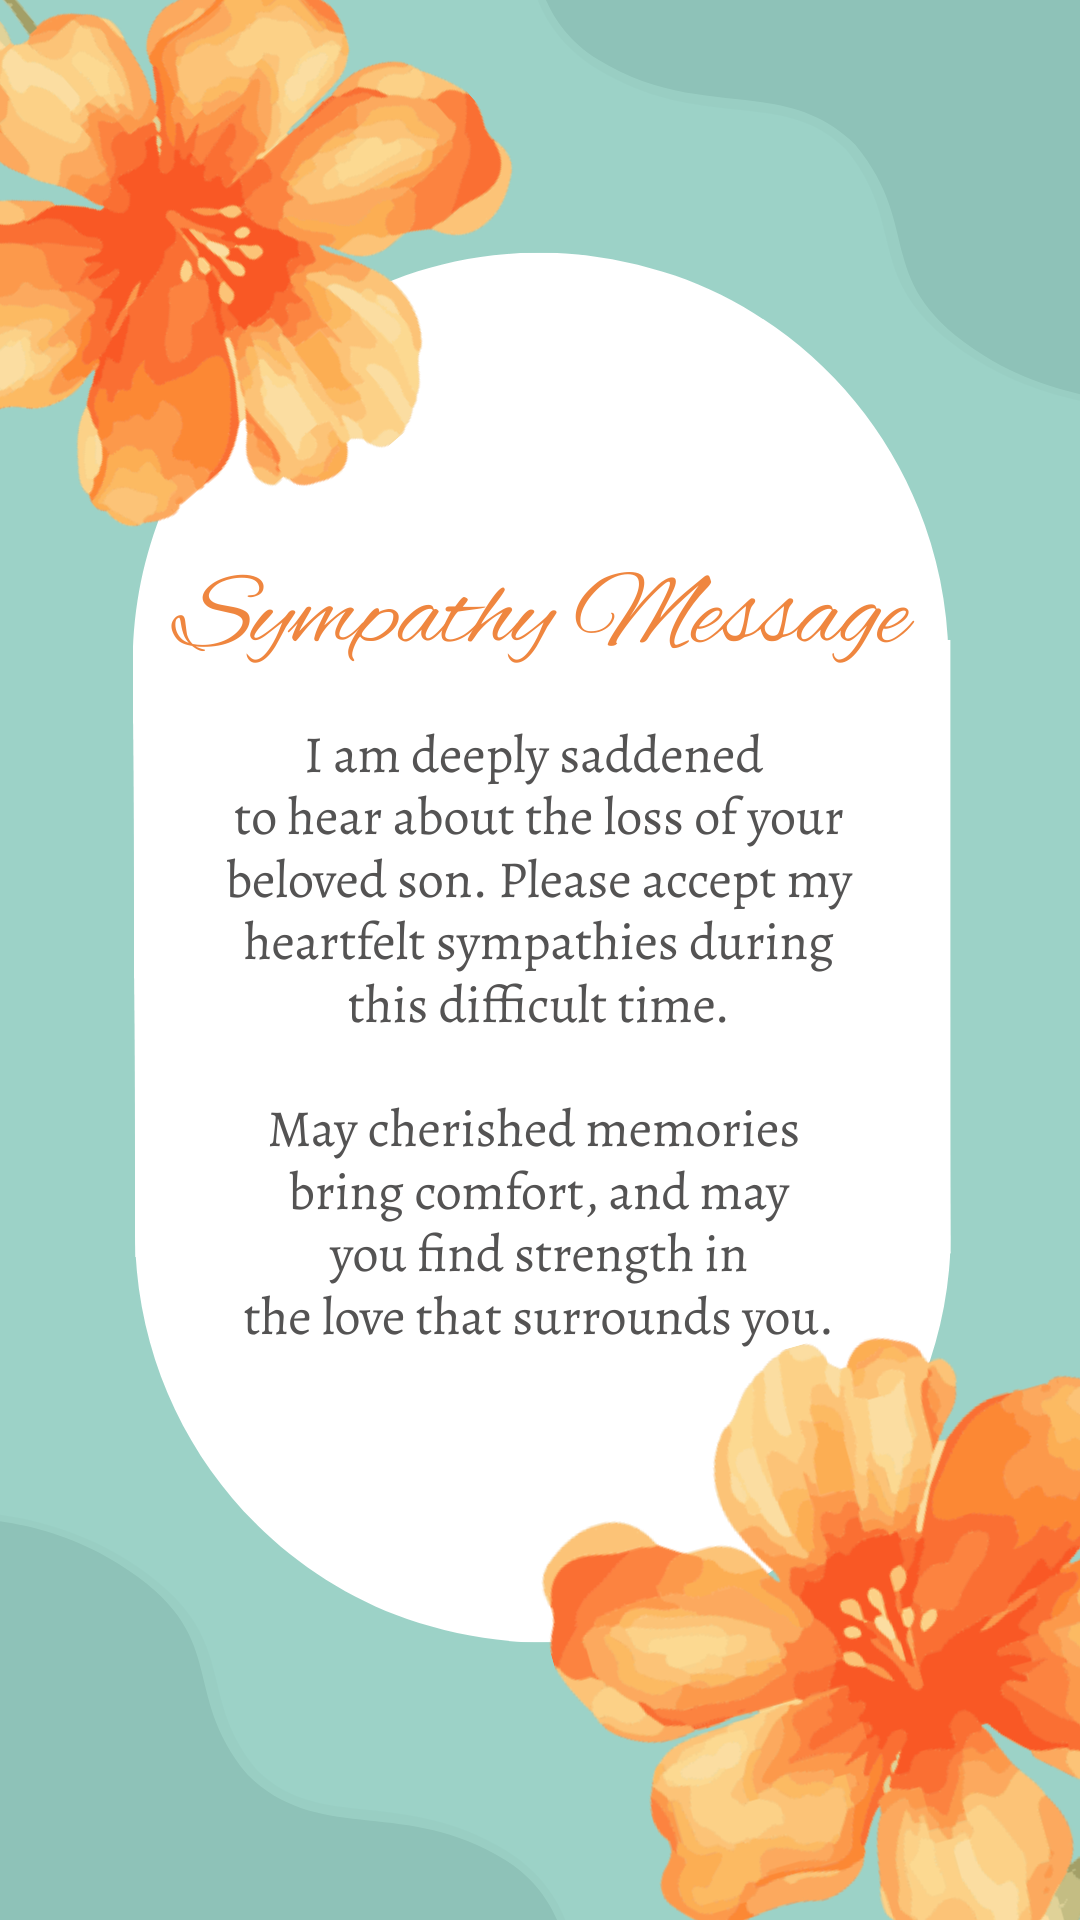 Sympathy Message For Loss of Son